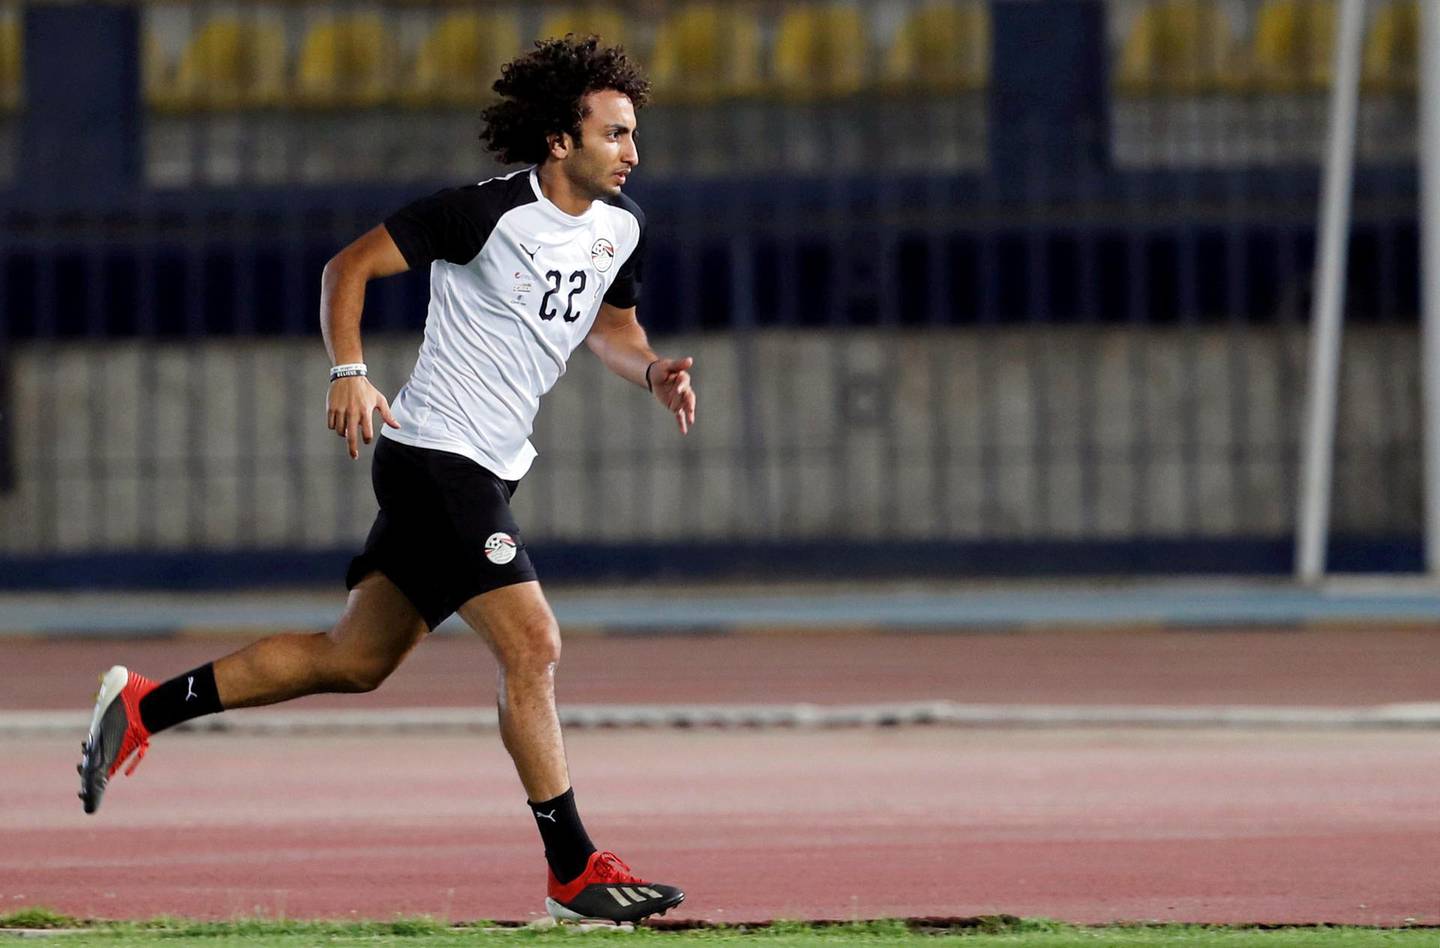 Soccer Football - Africa Cup of Nations 2019- Egypt Training - Military Academy Stadium, Cairo Egypt - June 29, 2019 - Egypt's Amr Warda takes part in a training in preparation for a match against Uganda. REUTERS/Mohamed Abd El Ghany